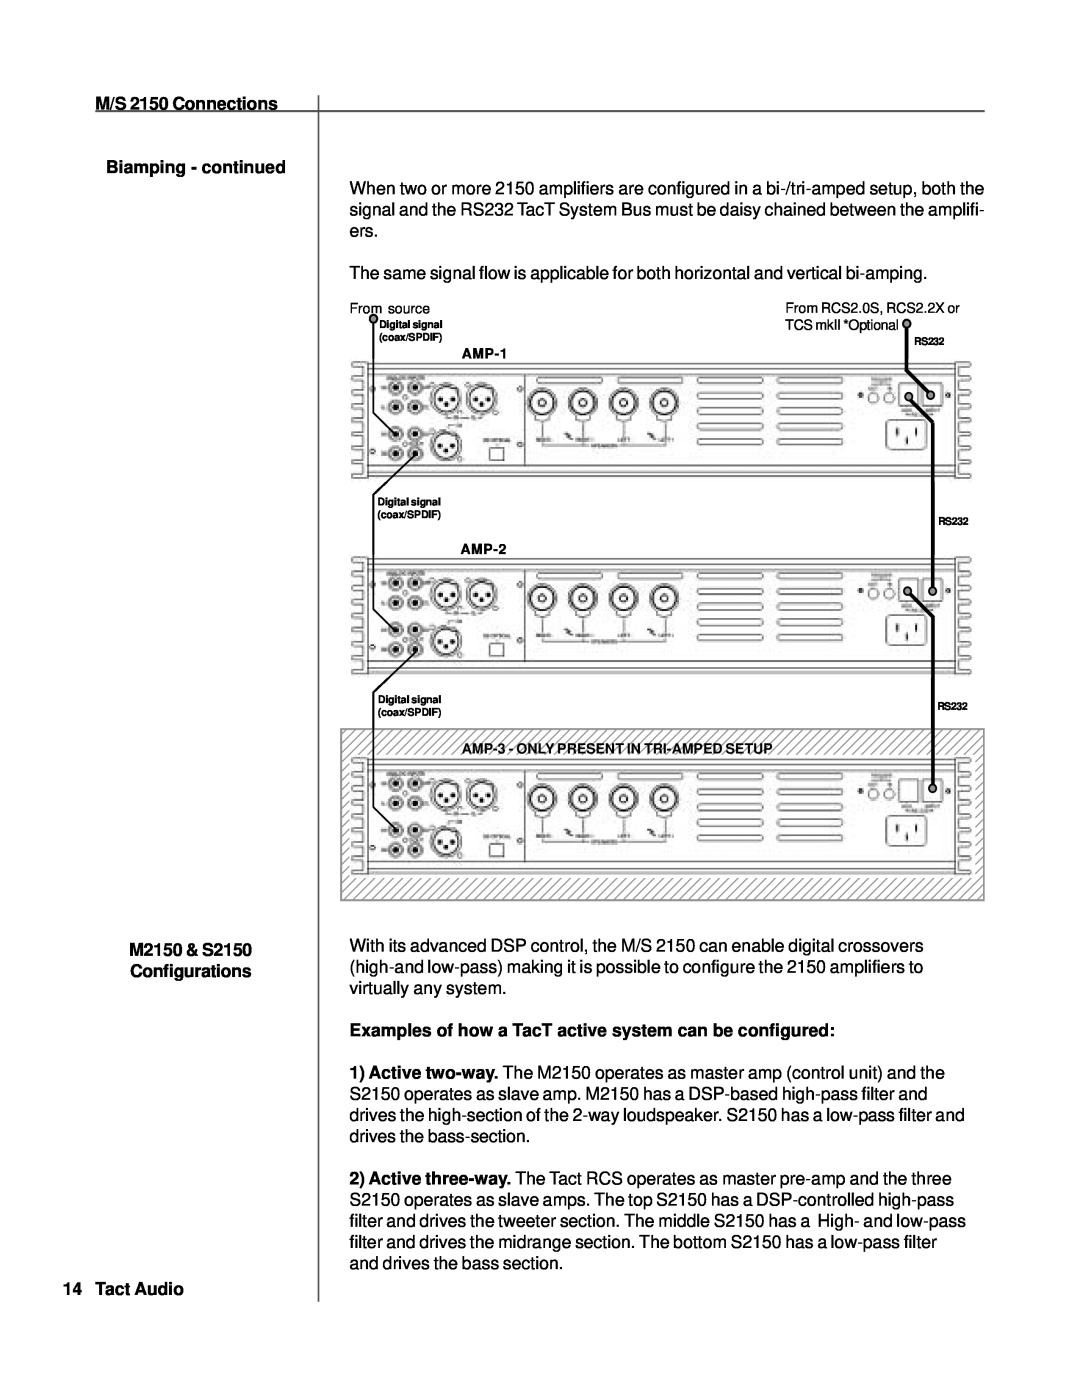 TacT Audio owner manual M/S 2150 Connections Biamping - continued, M2150 & S2150, Configurations, Tact Audio 